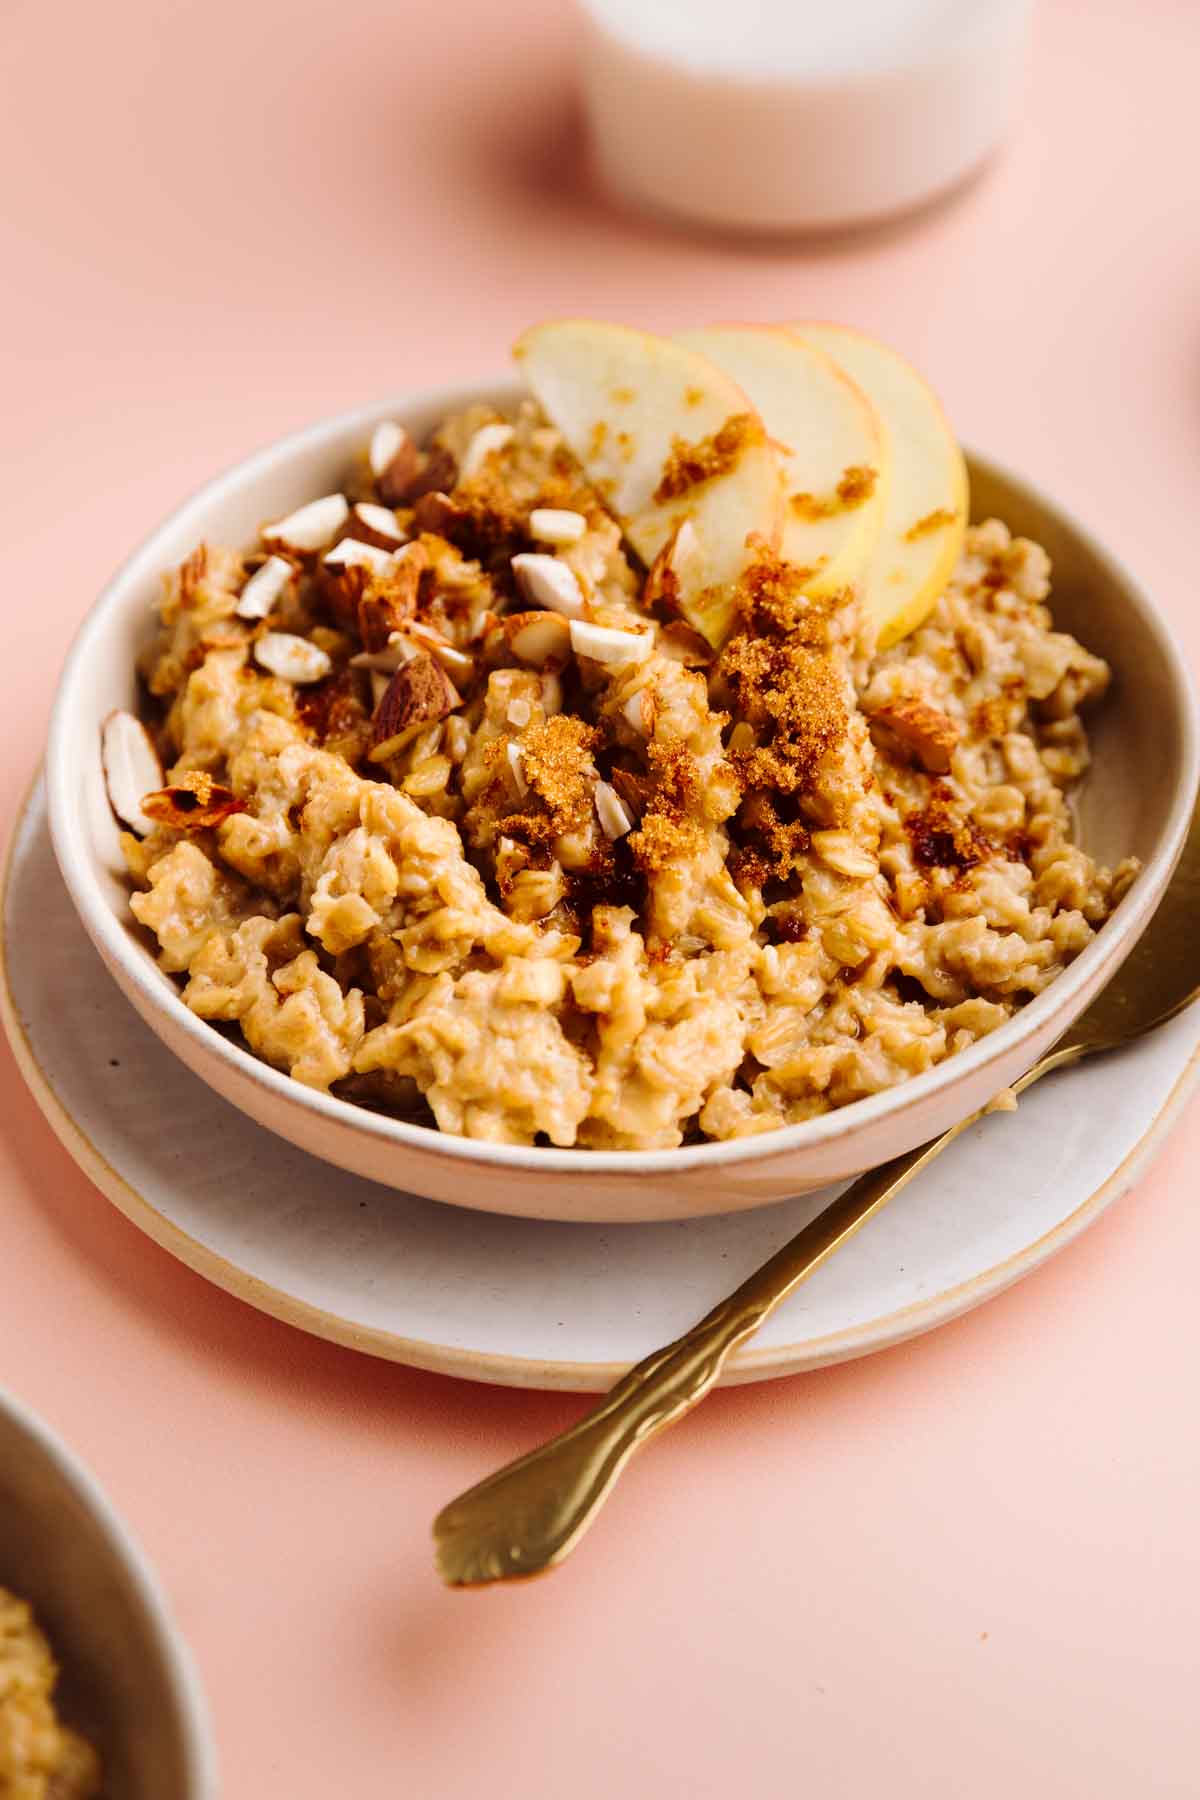 Brown Sugar Cinnamon Oatmeal topped with sliced apples, chopped almonds and brown sugar in a bowl on a plate with a gold colored spoon next to it and a glass of milk in the background.